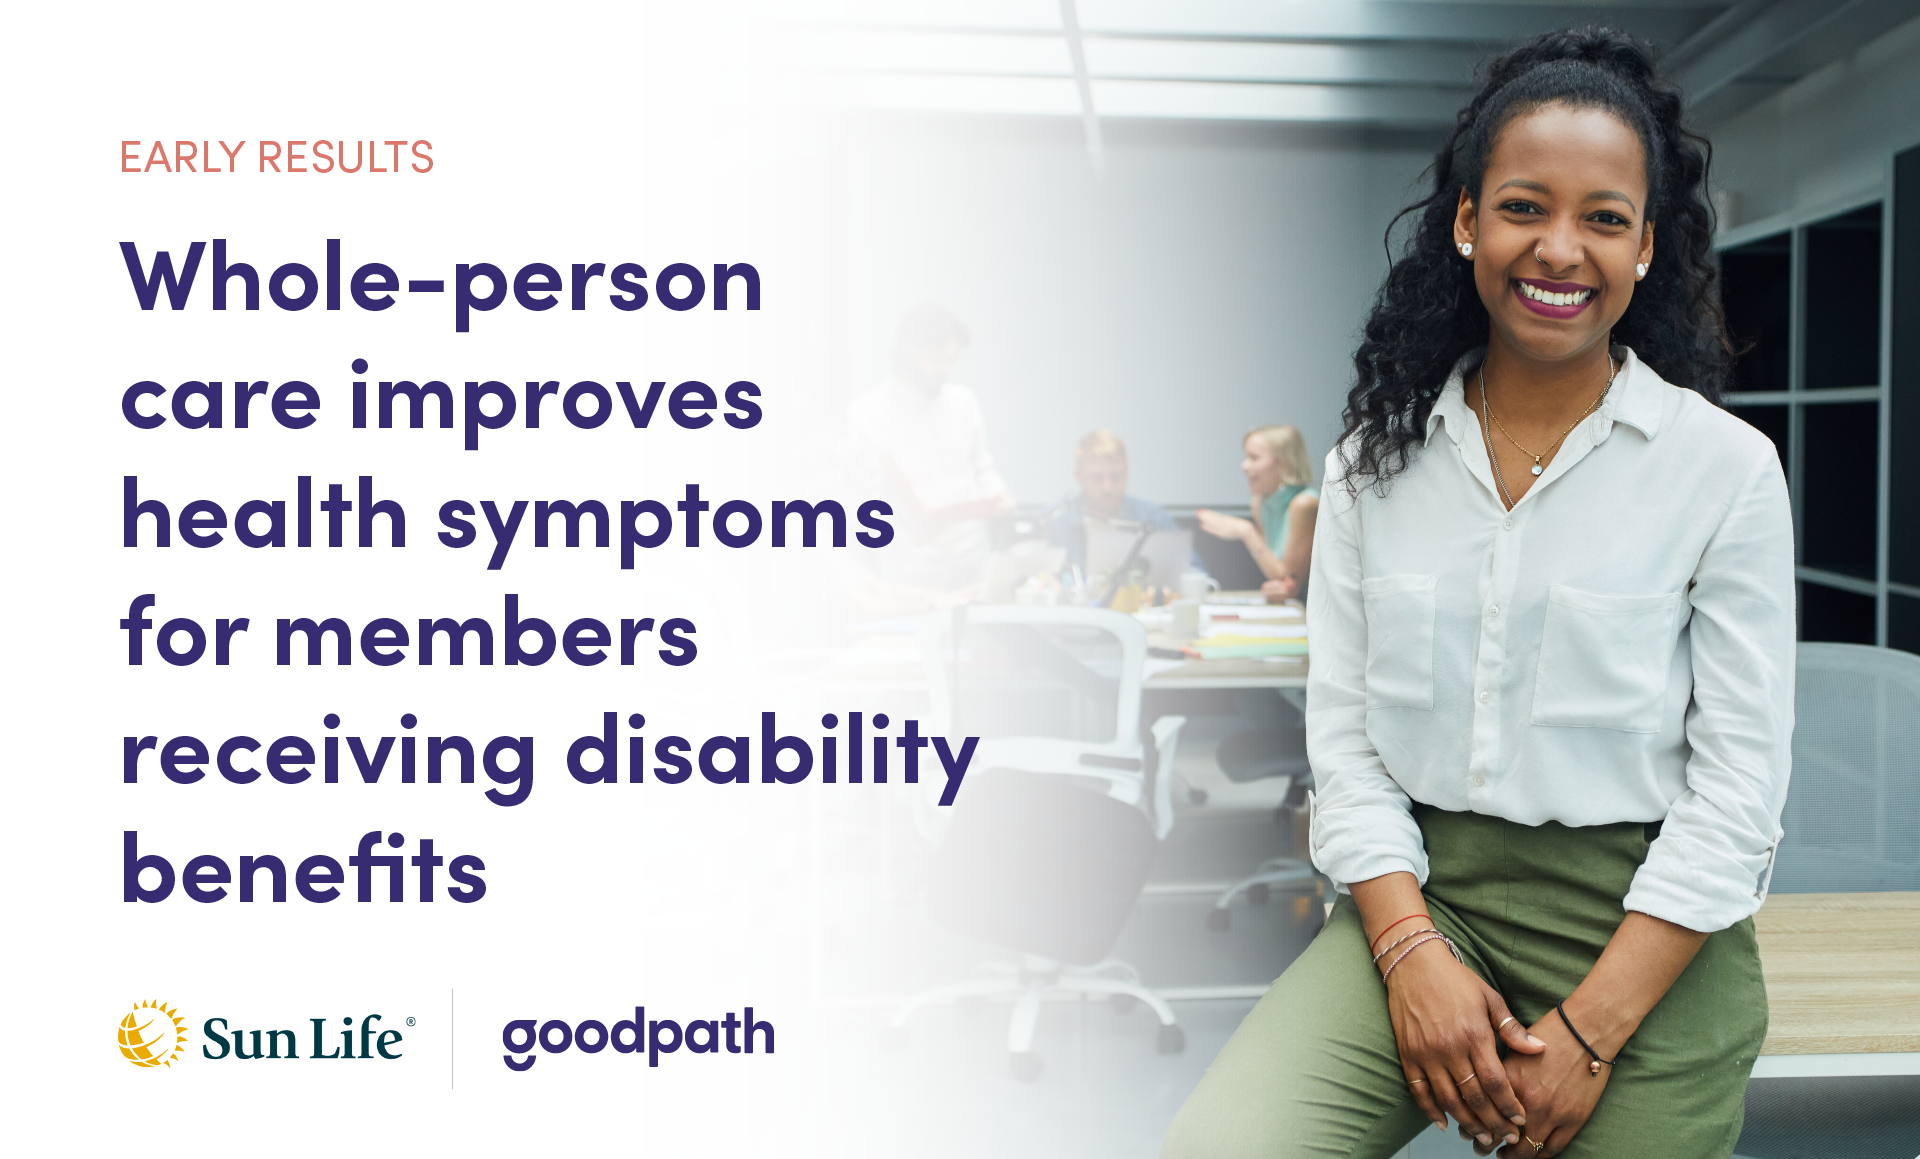 Early Results: Goodpath Improves Health for Sun Life Disability Members 